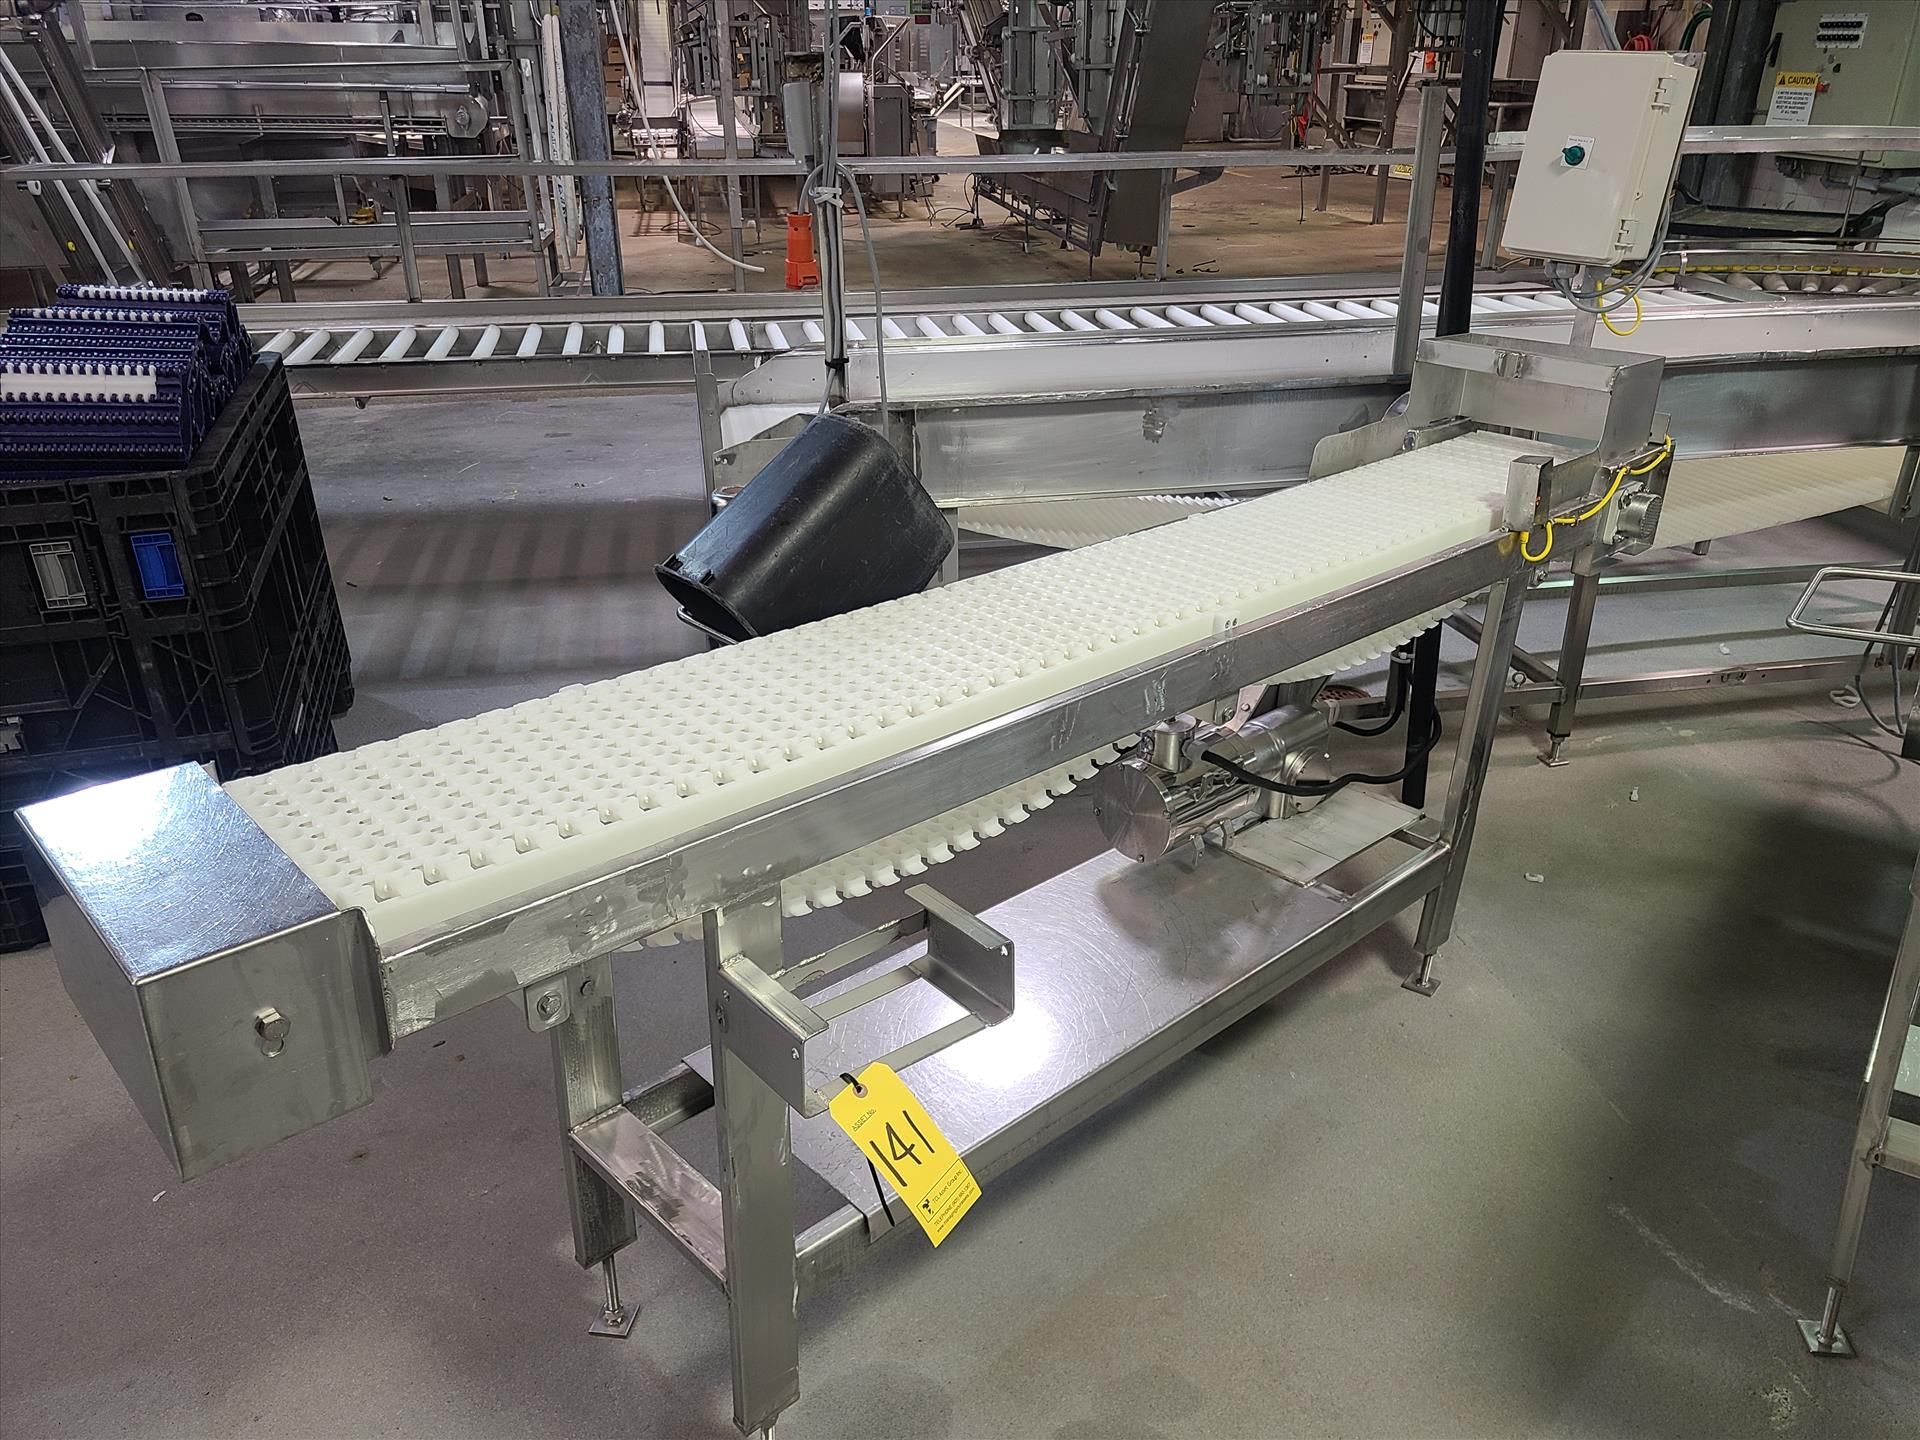 belt conveyor, approx. 11 in. x 8 ft., 0.75 hp wash-down motor, stainless steel [Loc. Whole Bird]